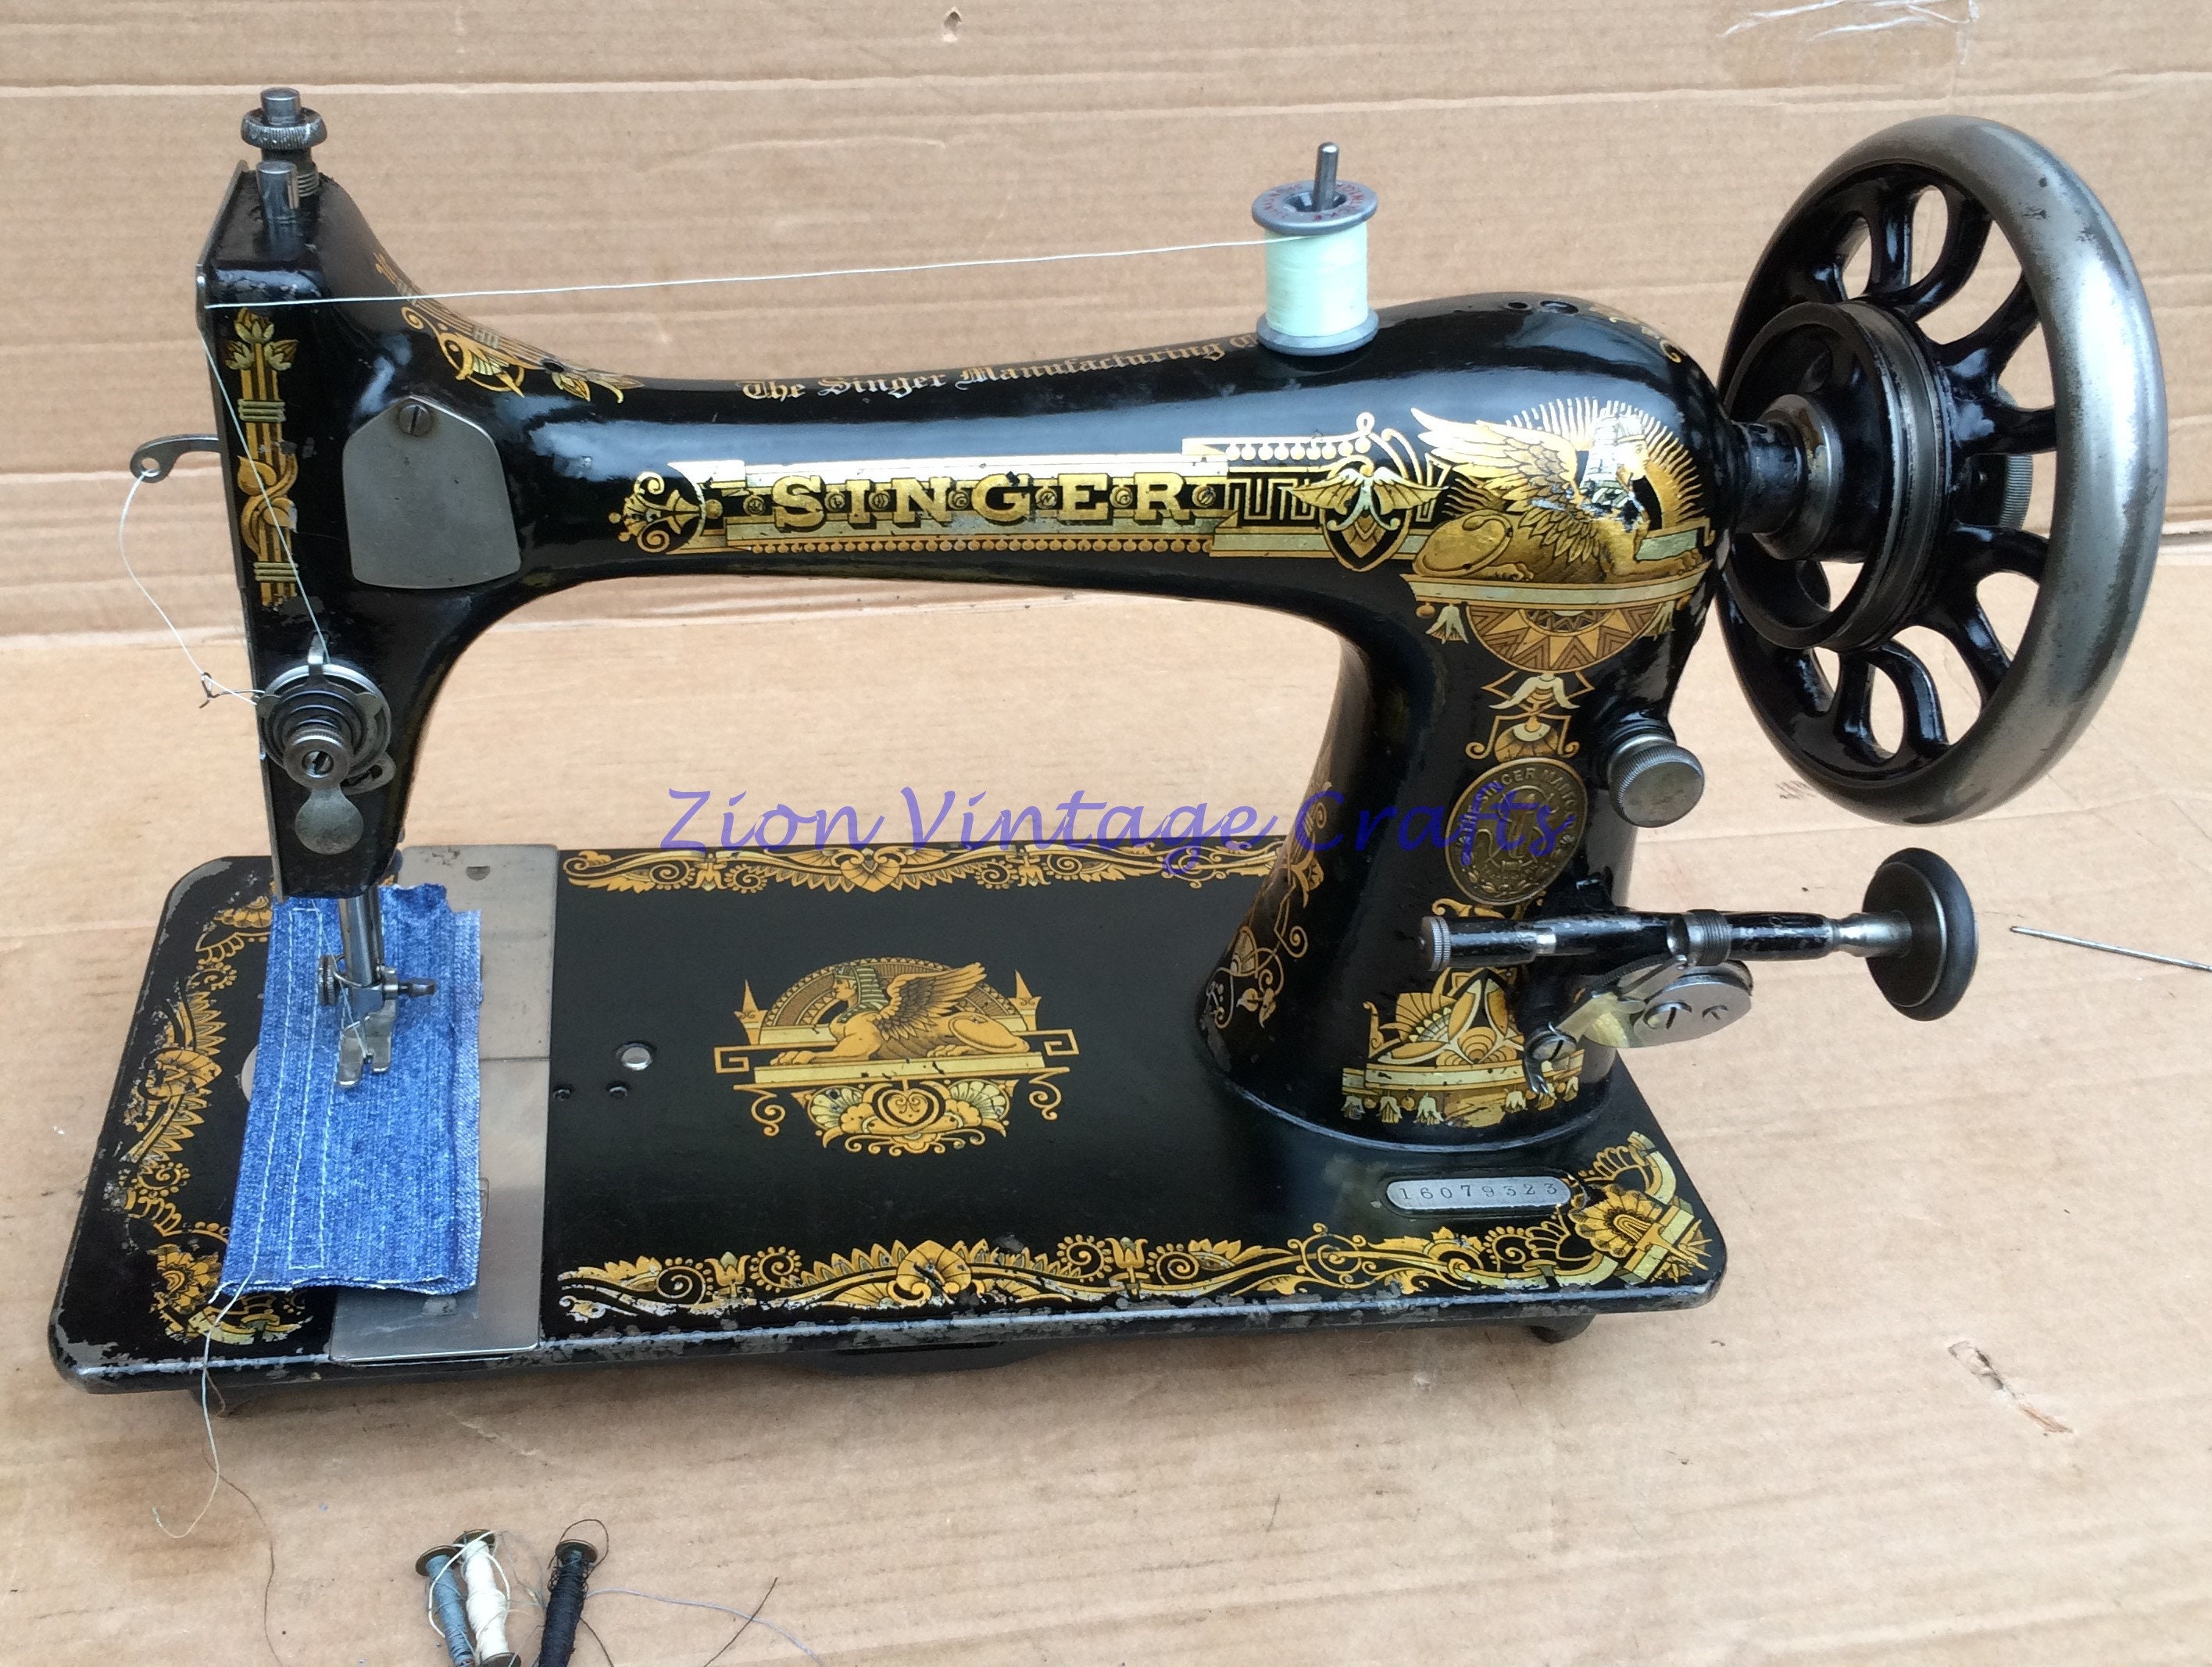 Singer28/27k Sewing Machine Accessories/attachment for Vibrating